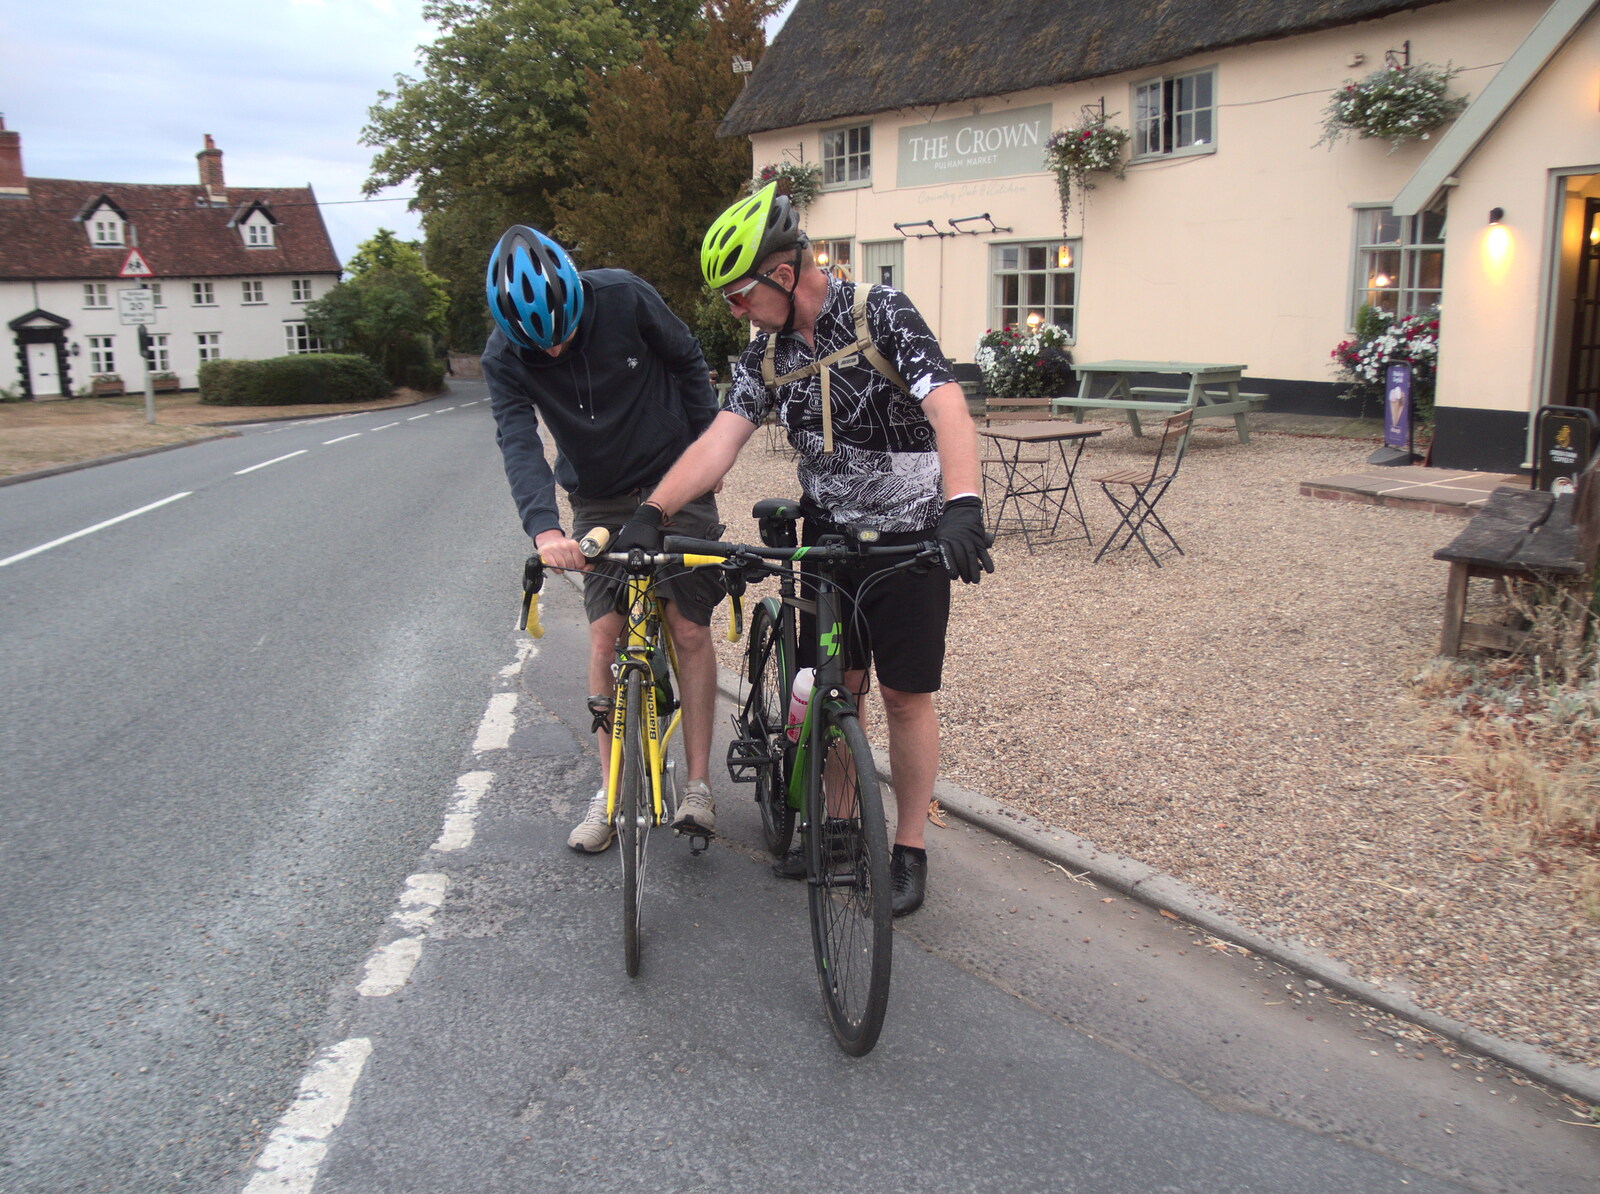 The Boy Phil's bike needs some adjustment from The BSCC at Pulham and Marc's Birthday at Ampersand Tap, Diss, Norfolk - 6th August 2022